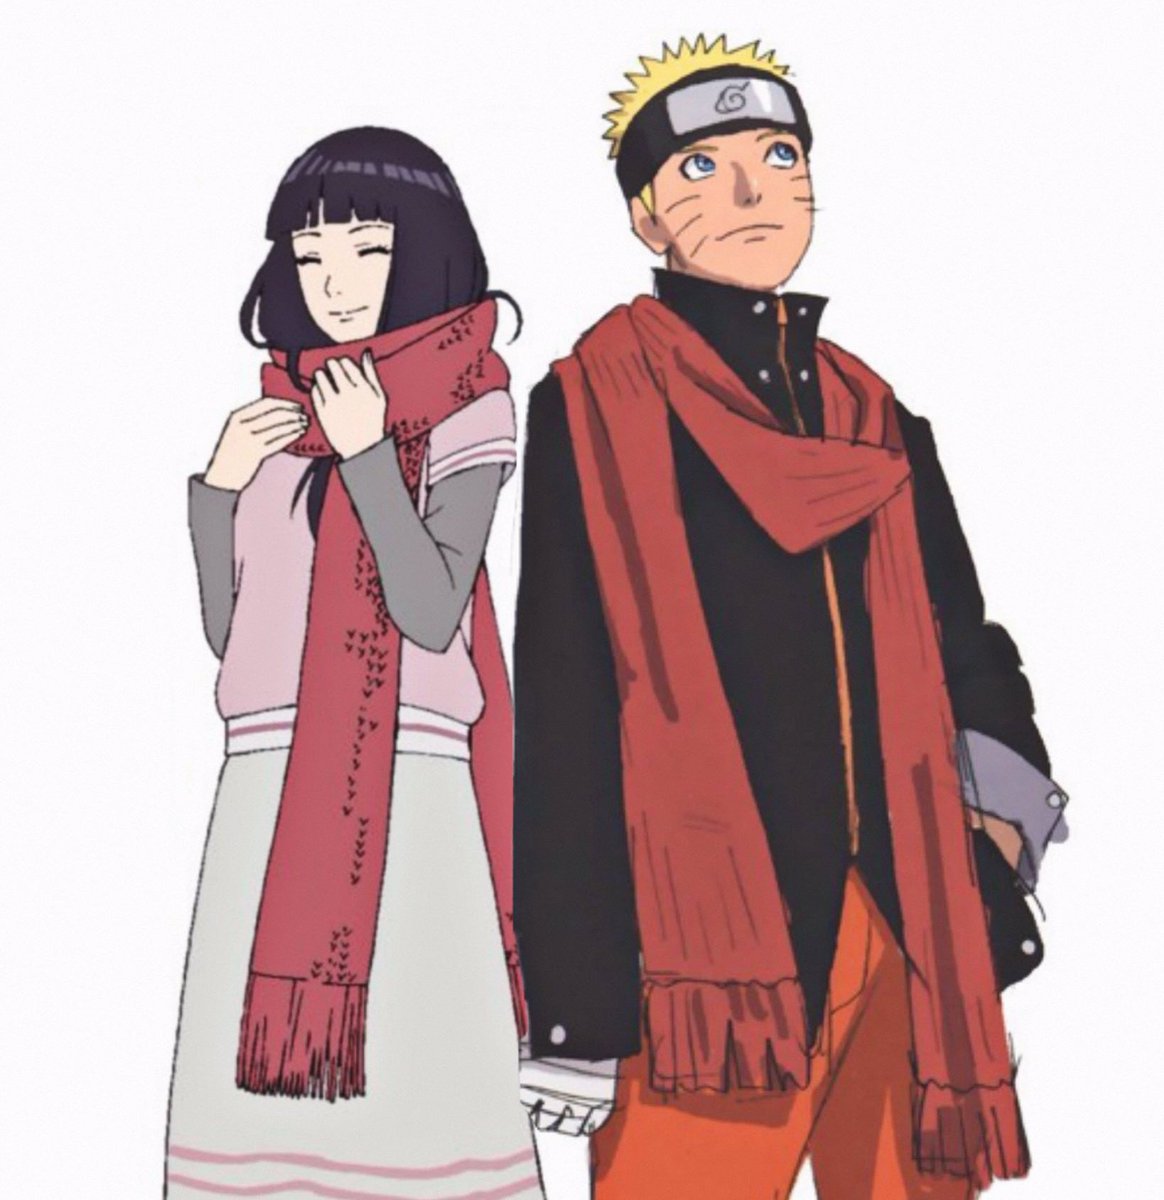 Some Naruto & Hinata references/cameos in other media over the years

- A thread -